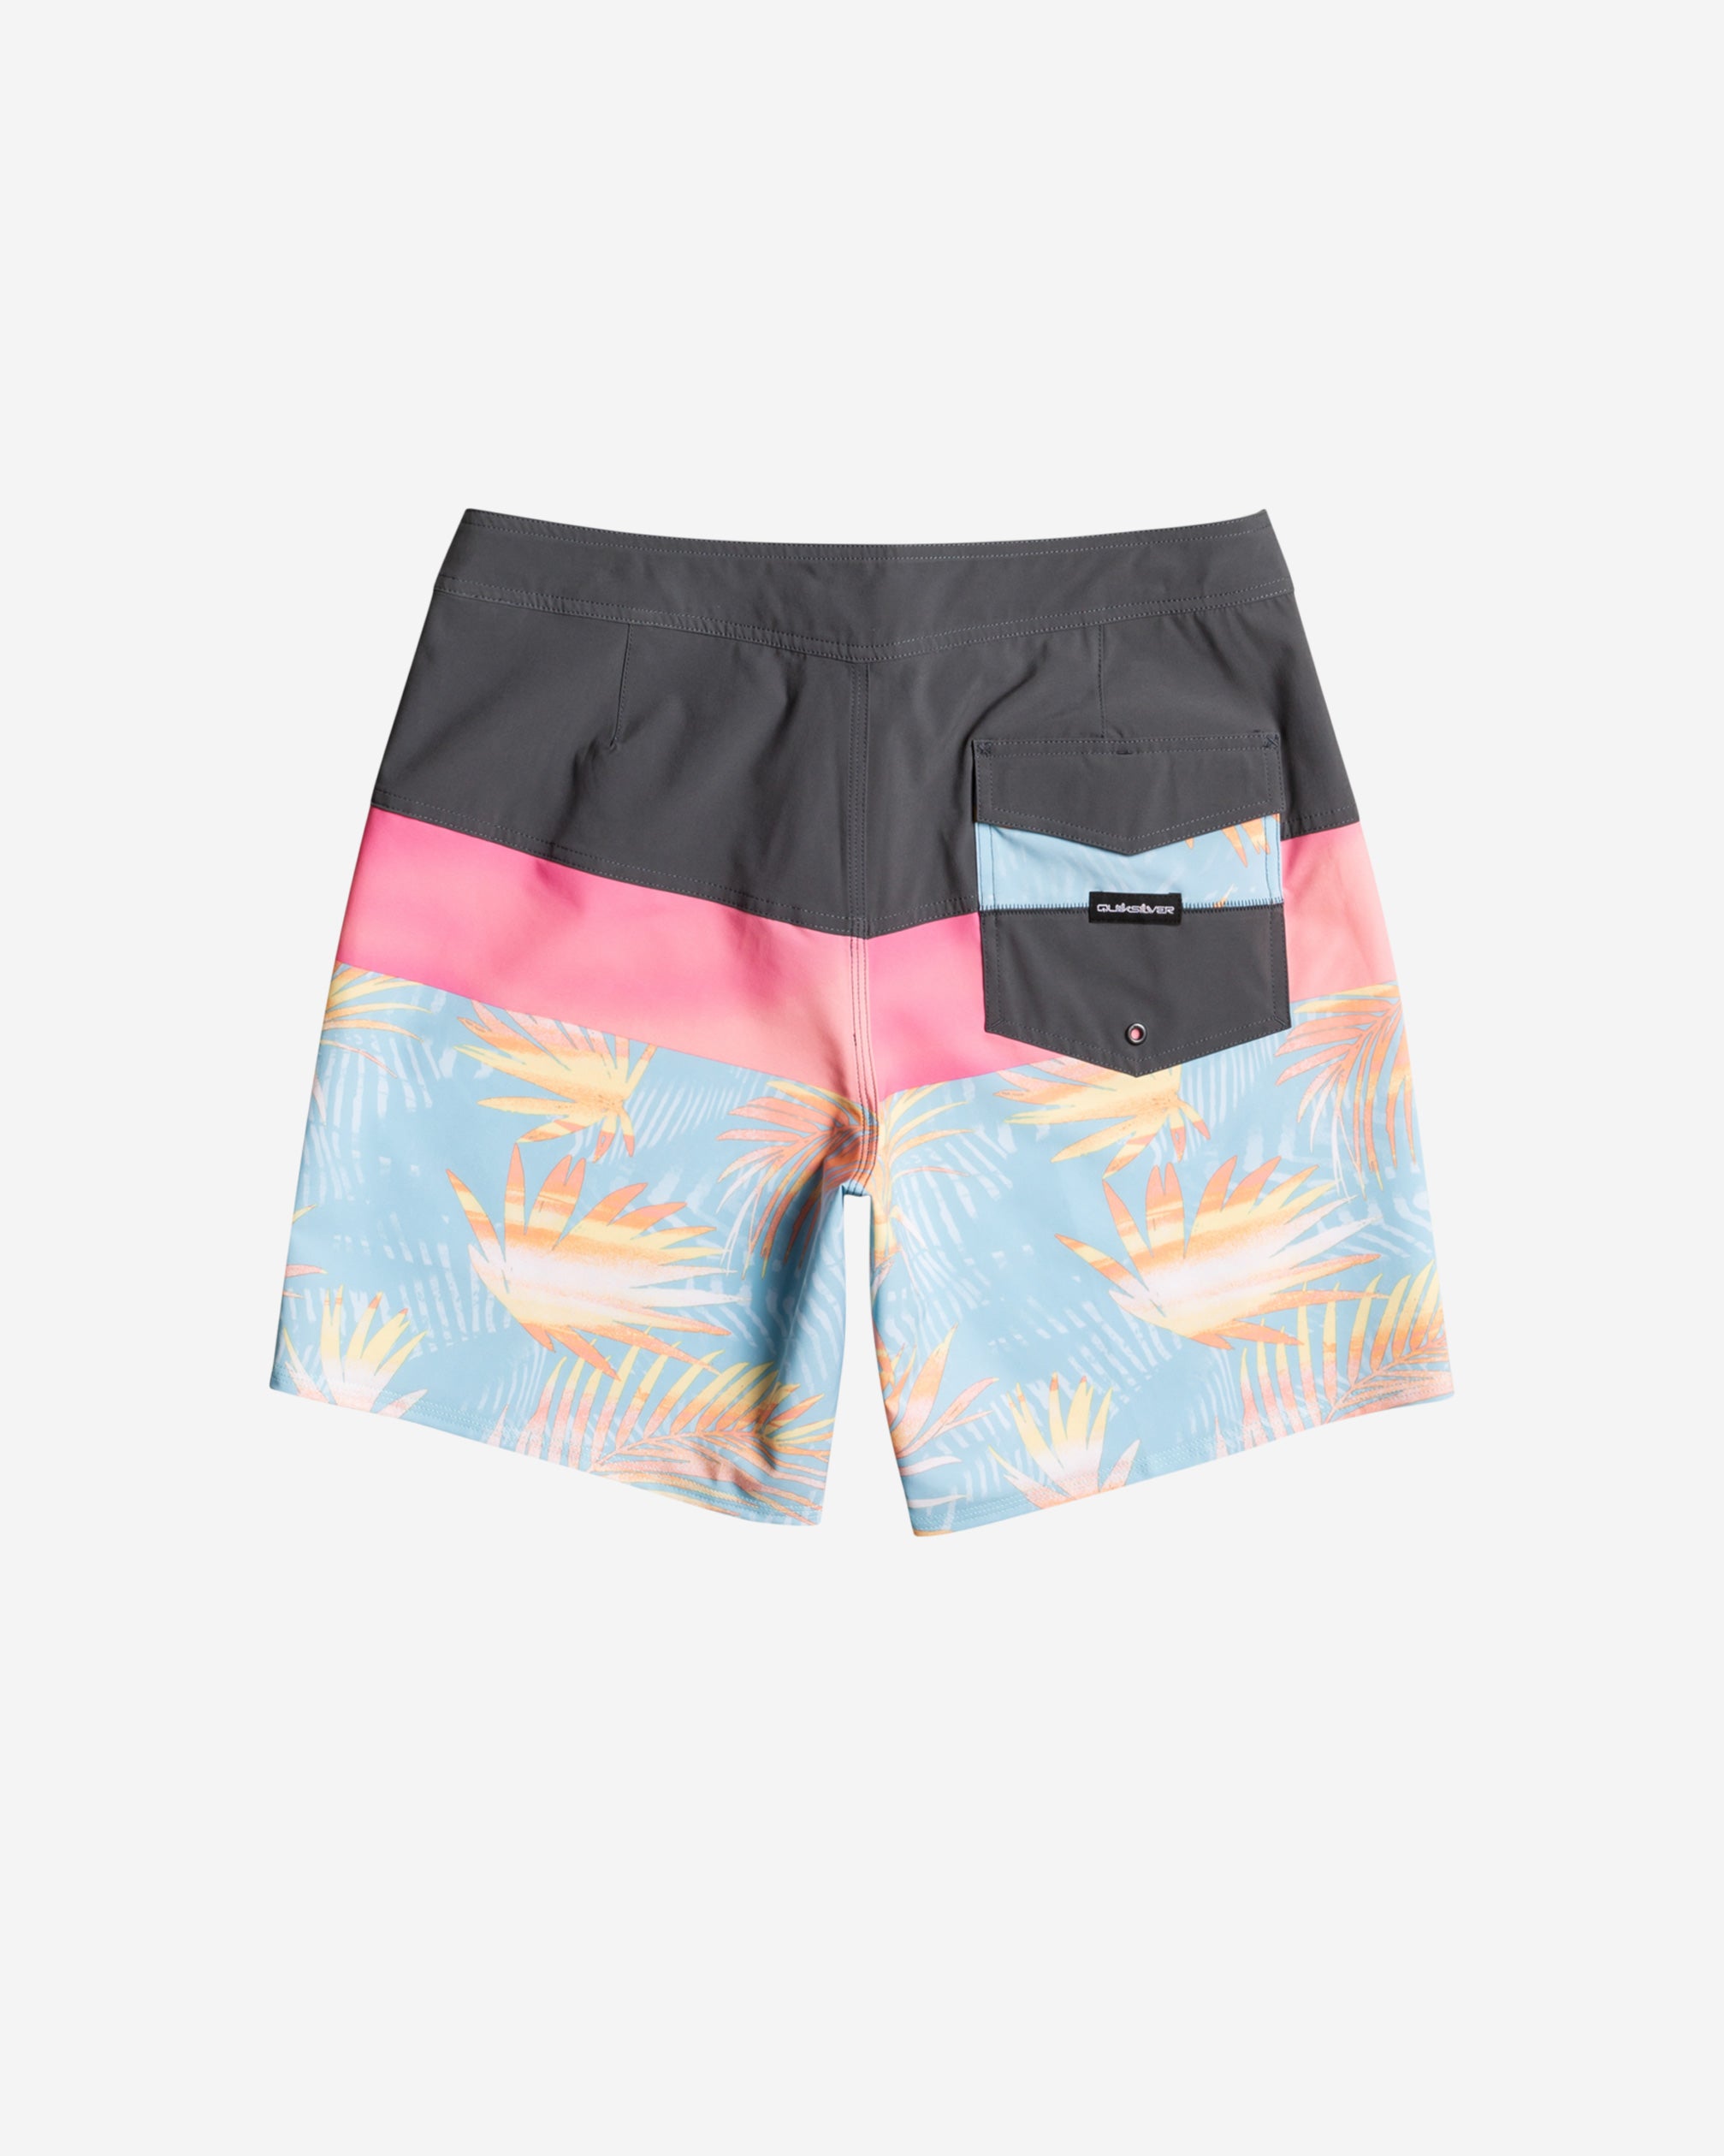 Prepare for battle. The SurfSilk Panel Boardshorts for men arms you with 4-way stretch for supreme mobility and camo panels for intense style. Built for high-performance surfing, the lineup won't know what hit it.